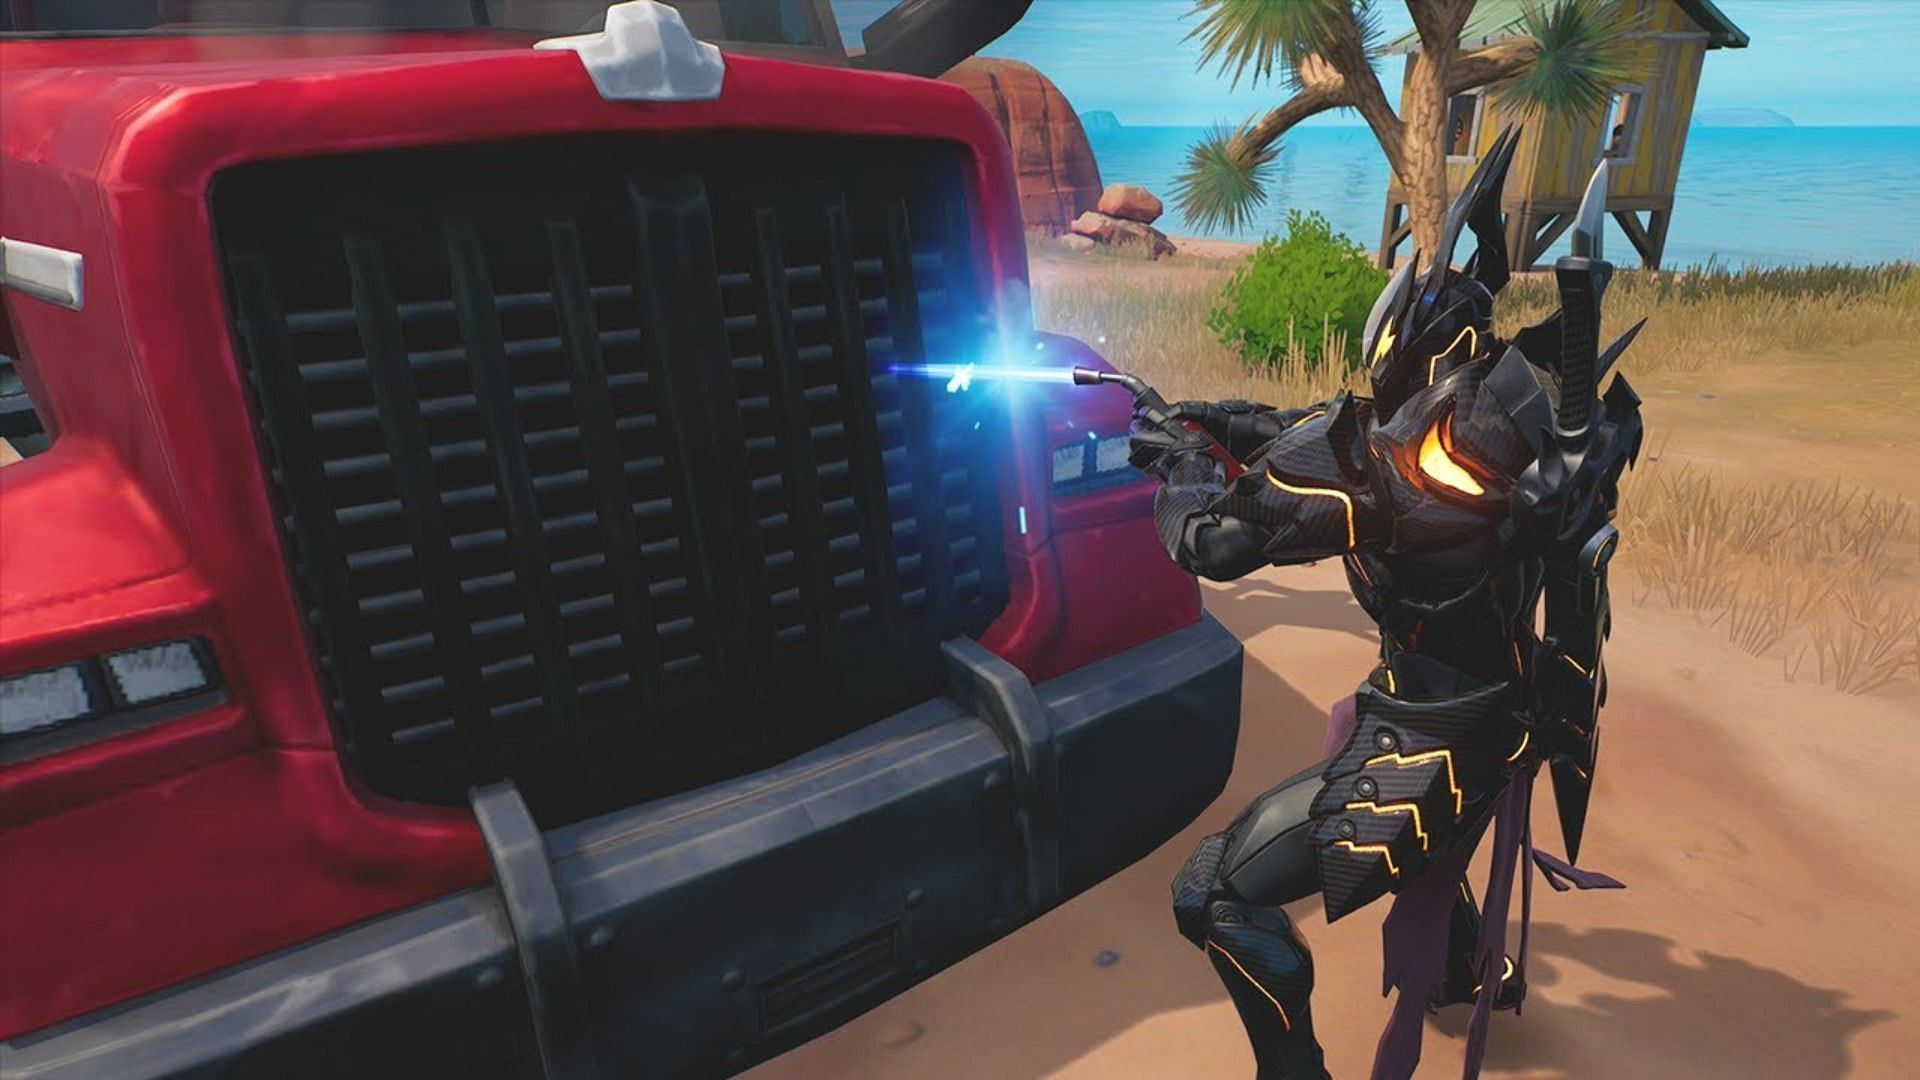 Players can use guns to inflict damage on vehicles. (Image via Youtube/Vizion)